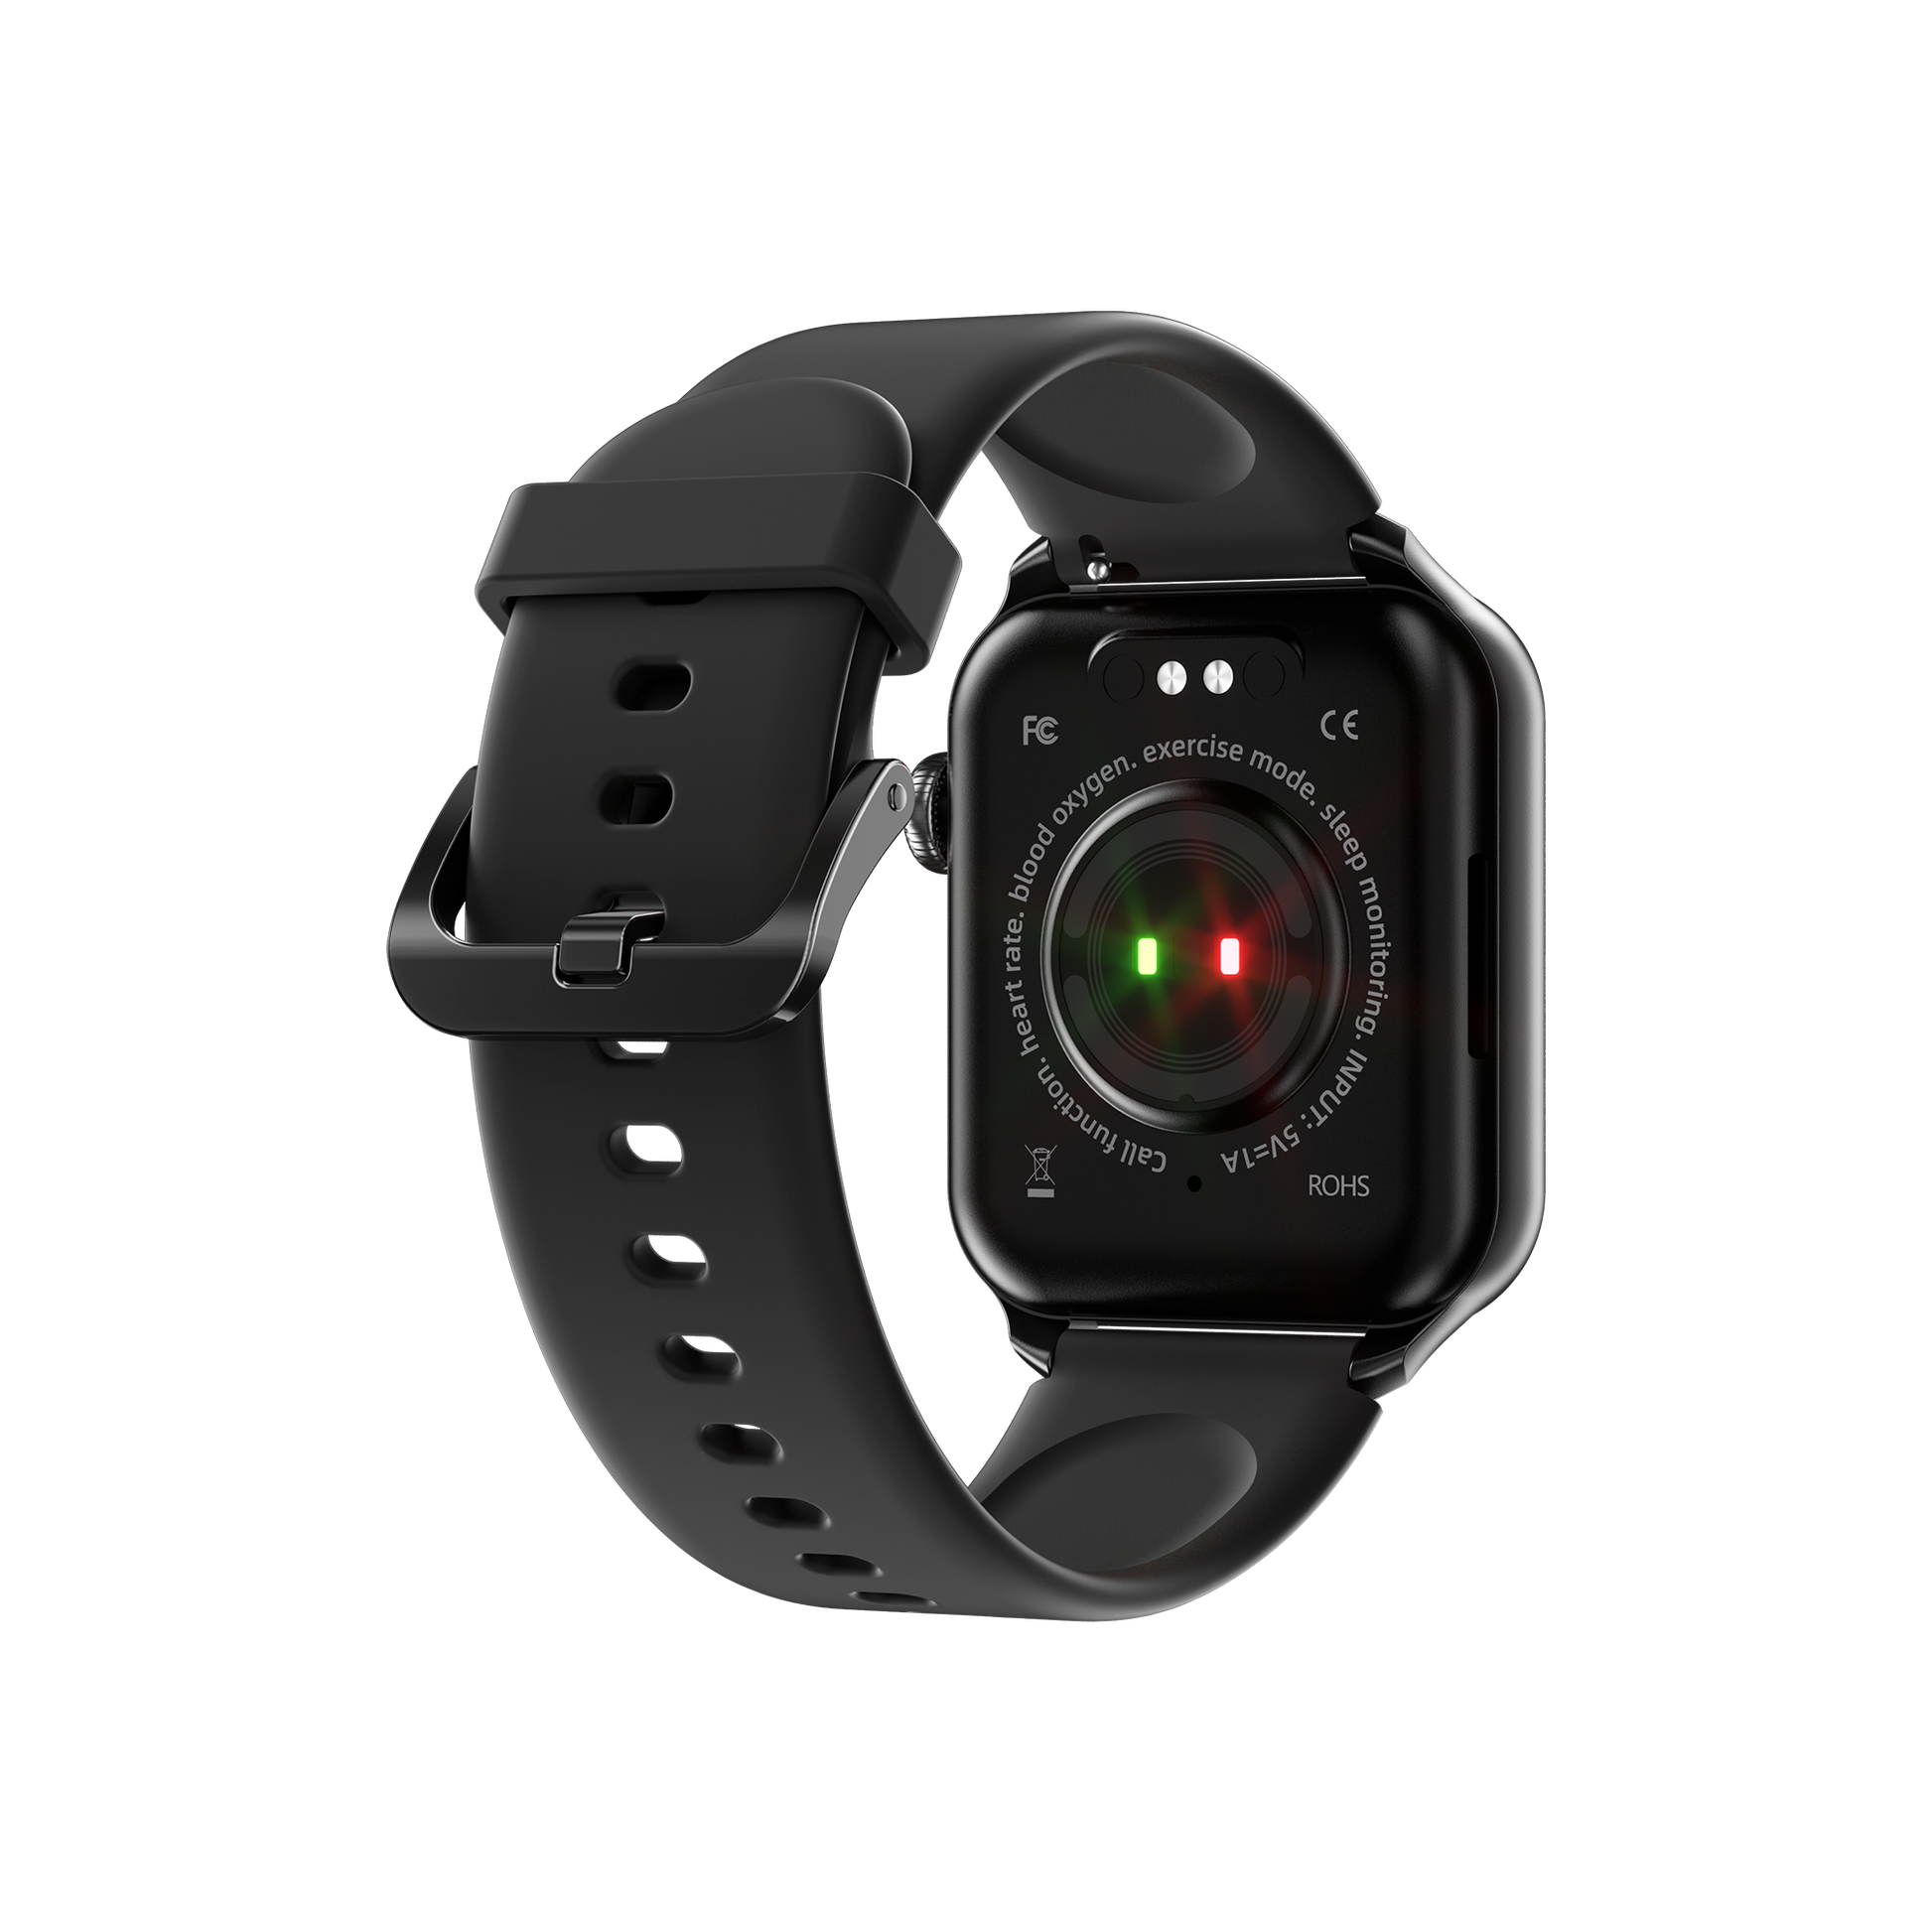 Optimized Product Title: X5 Pro+ X7 Pro Smartwatch With 1.46 HD Screen,  Long Battery Life, GPS, NFC Payment, And Wireless Charging 2020 Edition  From Spacex, $13.17